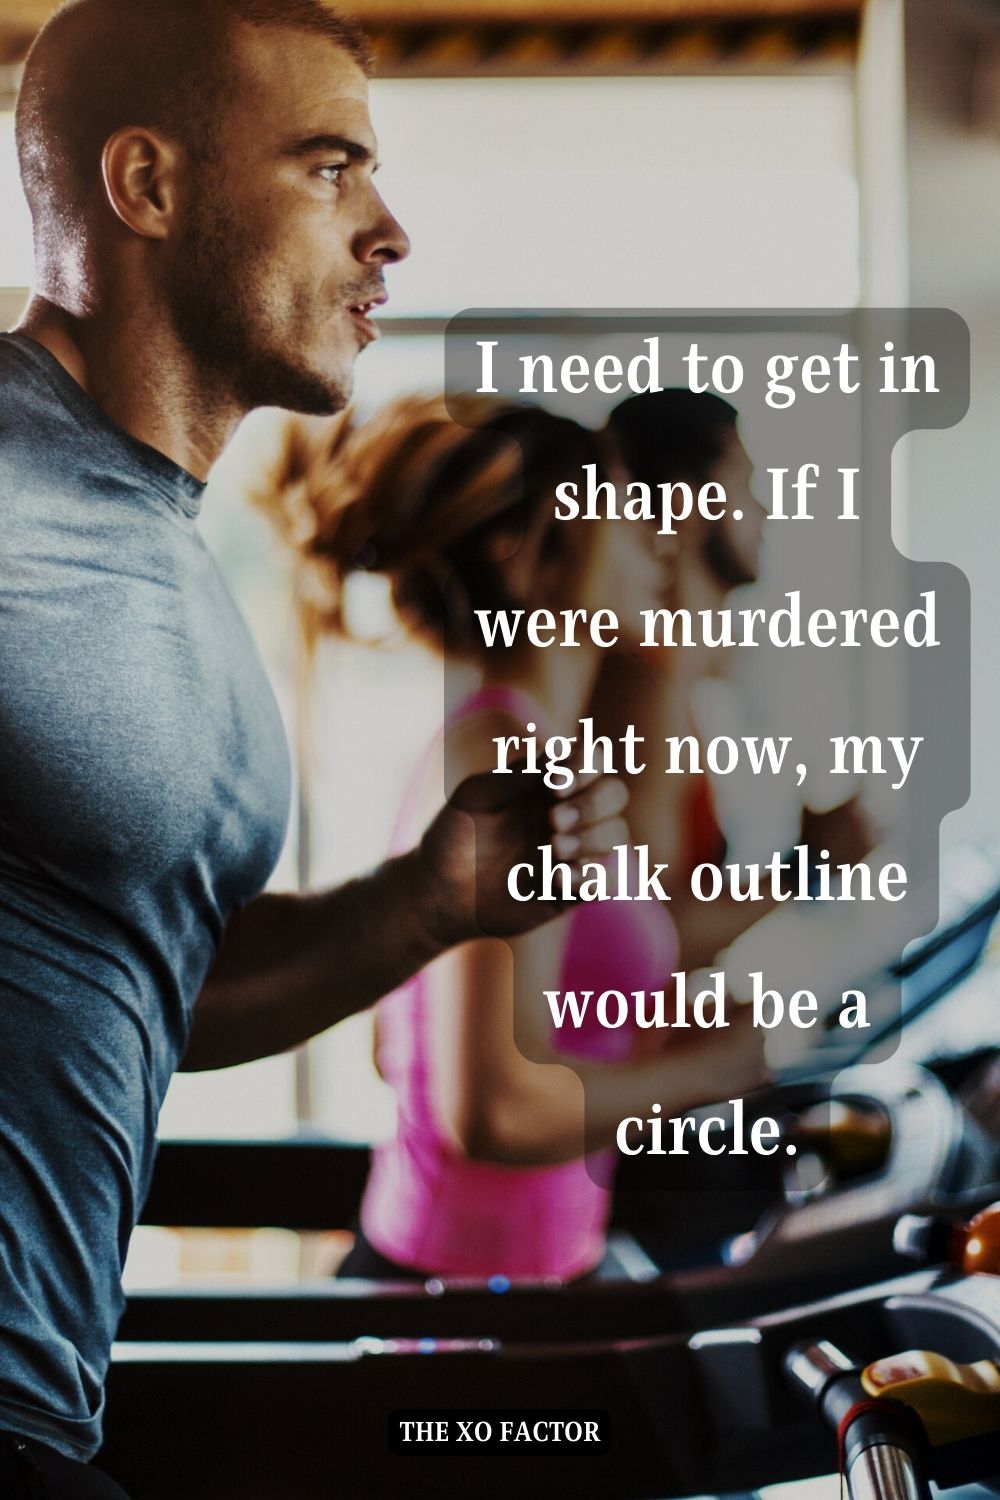 I need to get in shape. If I were murdered right now, my chalk outline would be a circle.